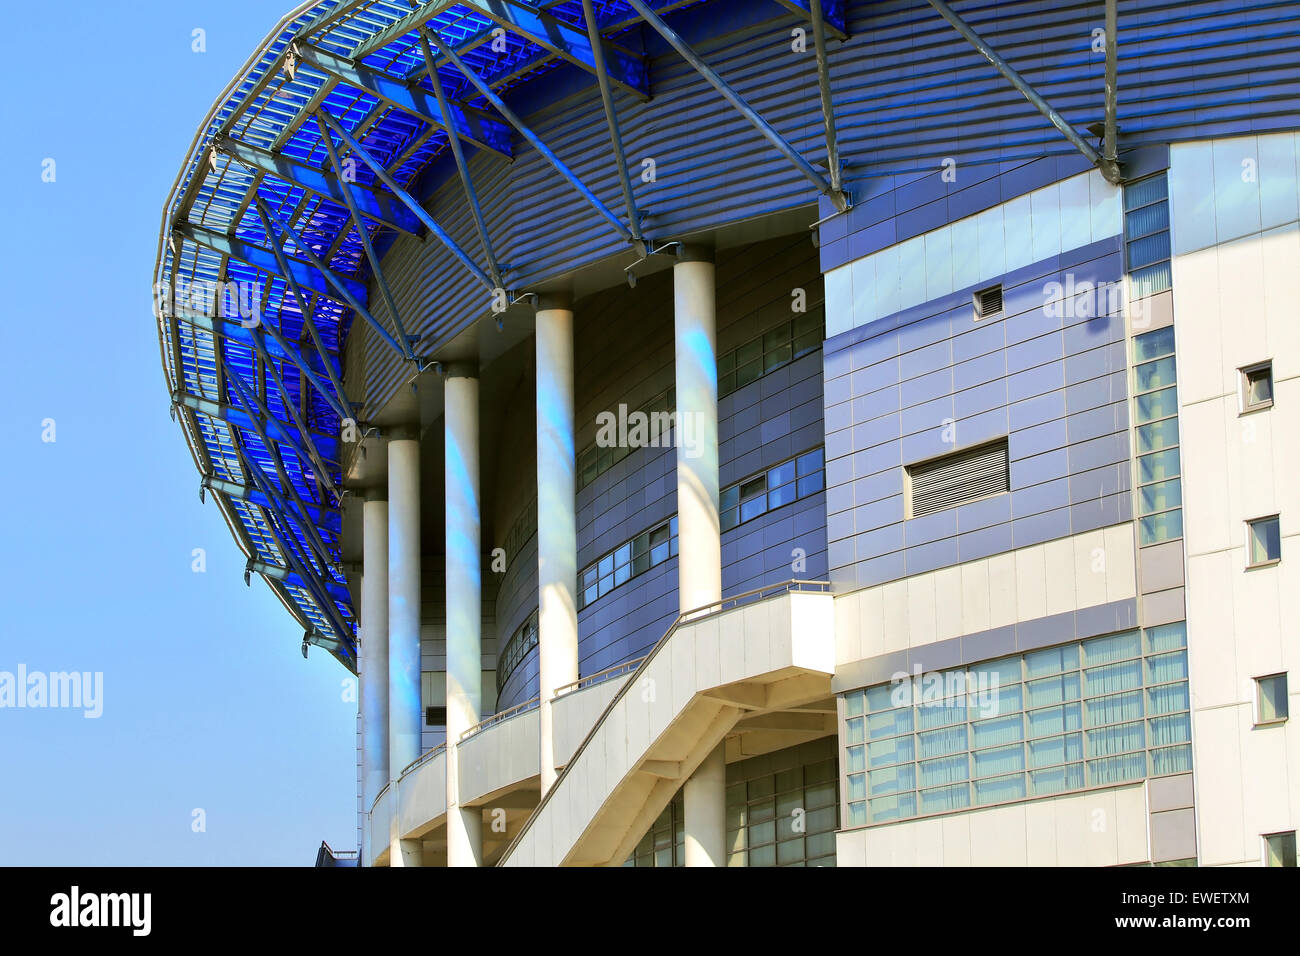 Reinforced concrete structures of large sports facility with supporting pillars and steel cables Stock Photo